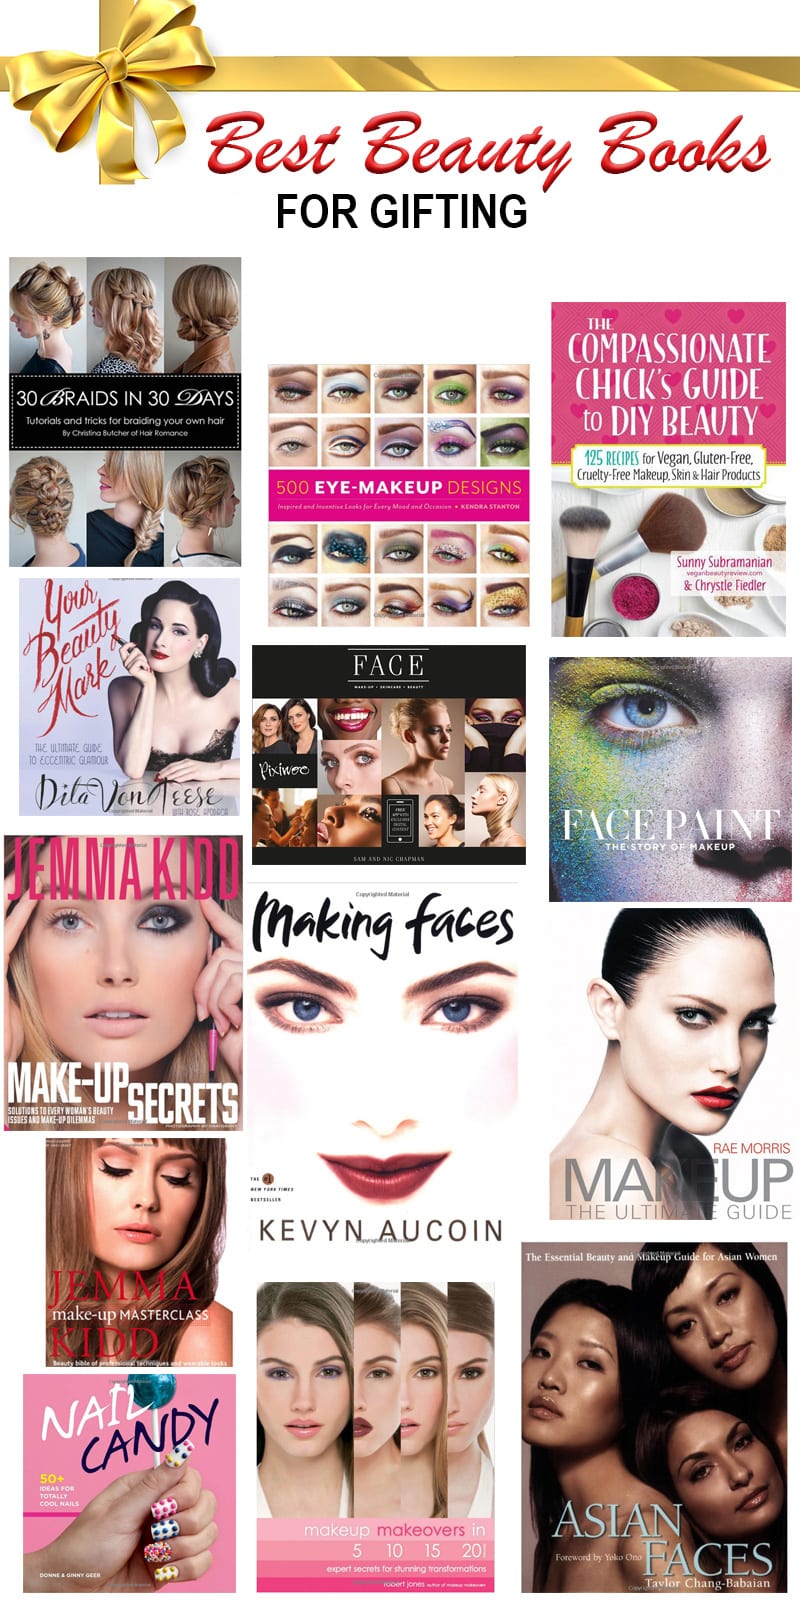 13 Best Beauty Books for Gifting for the Holidays - Makeup, Hair & Nails